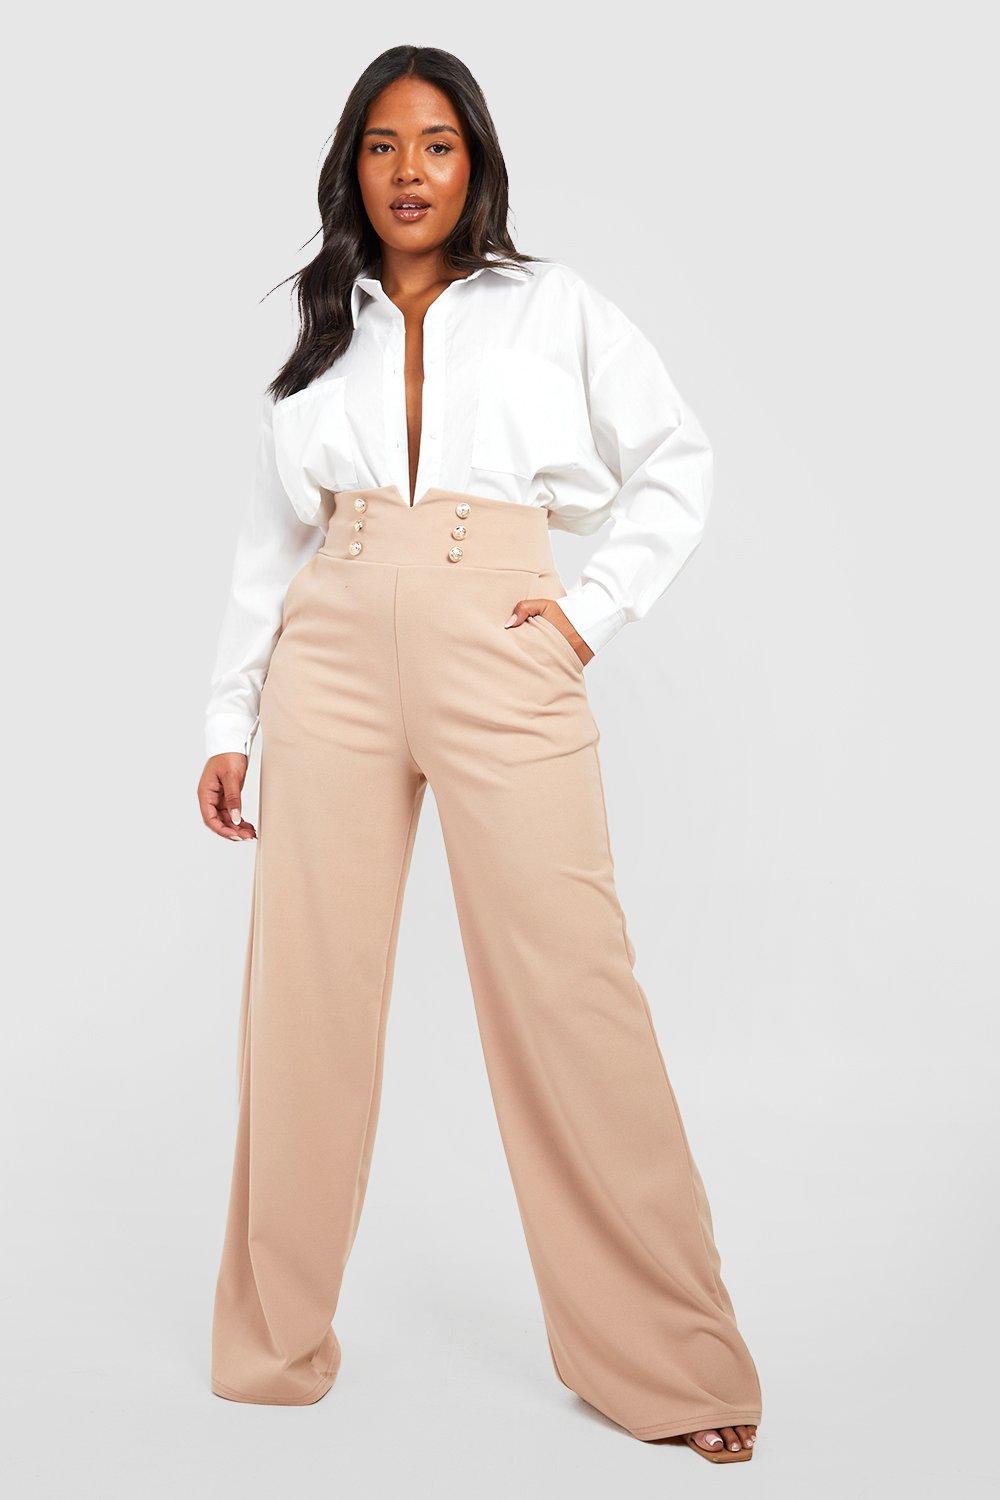 Women's Plus Size High Waisted Trousers